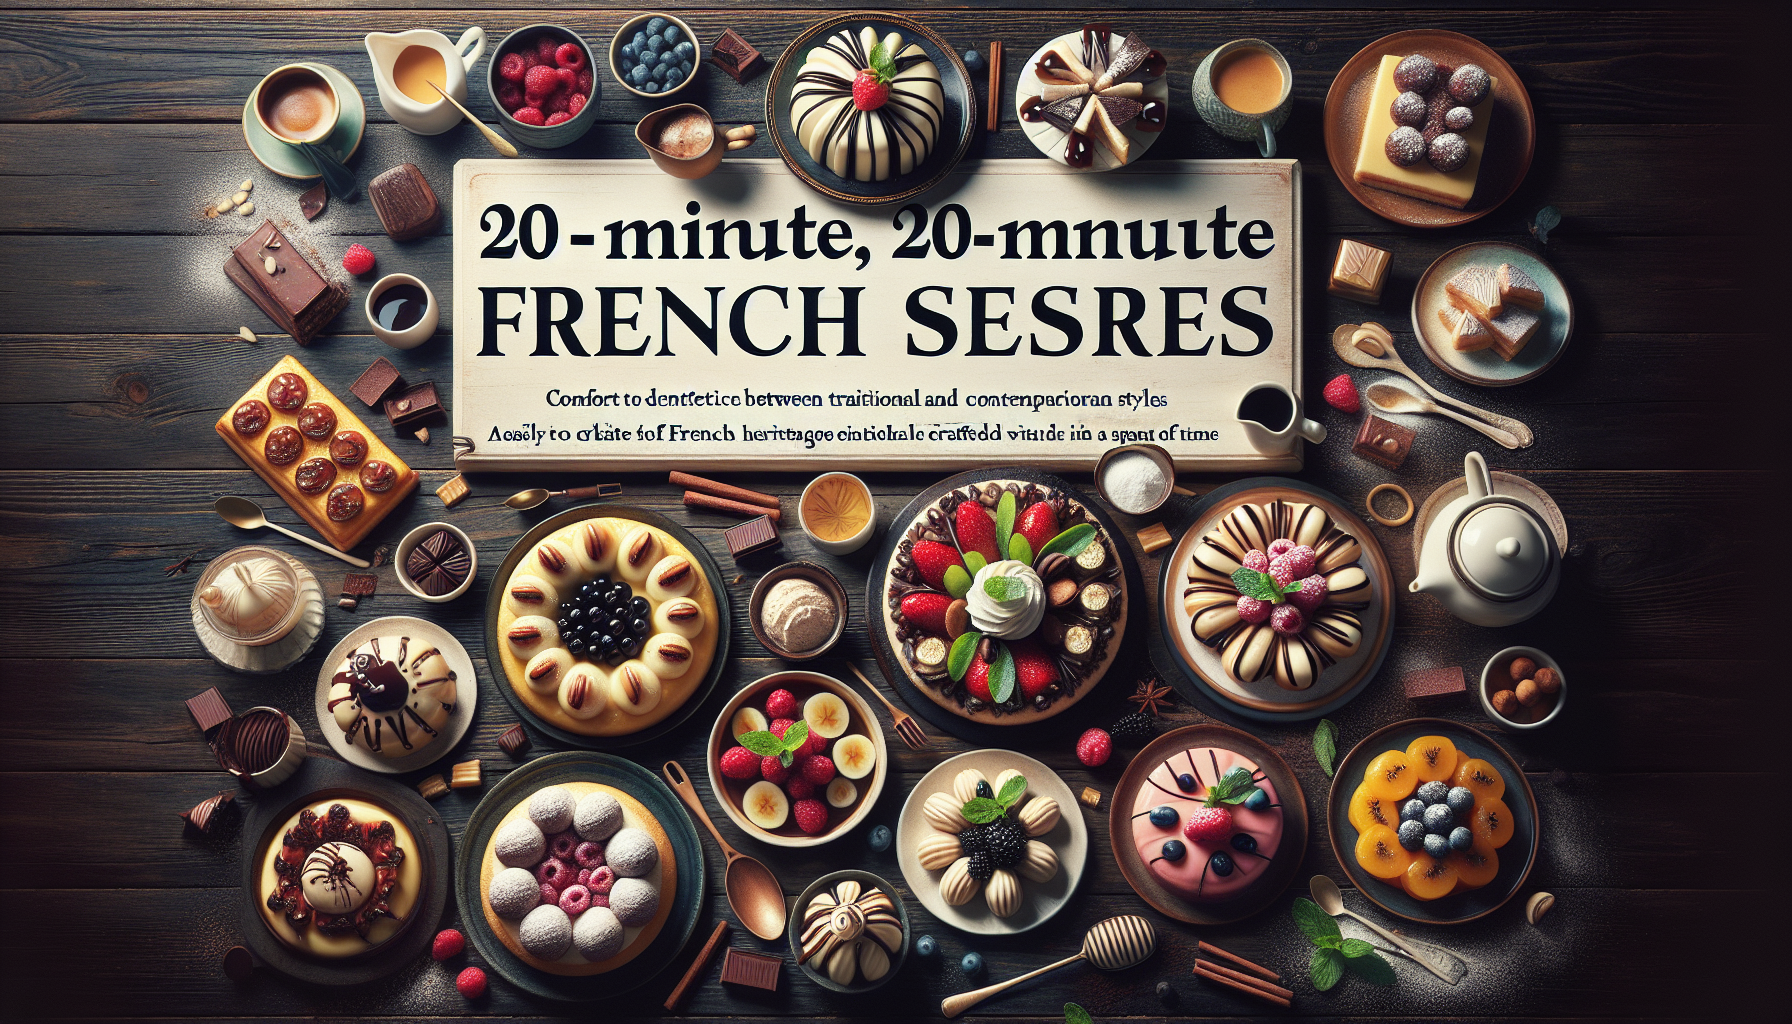 Whats Your Favorite 20-minute Comforting French Dessert For A Quick Indulgence?